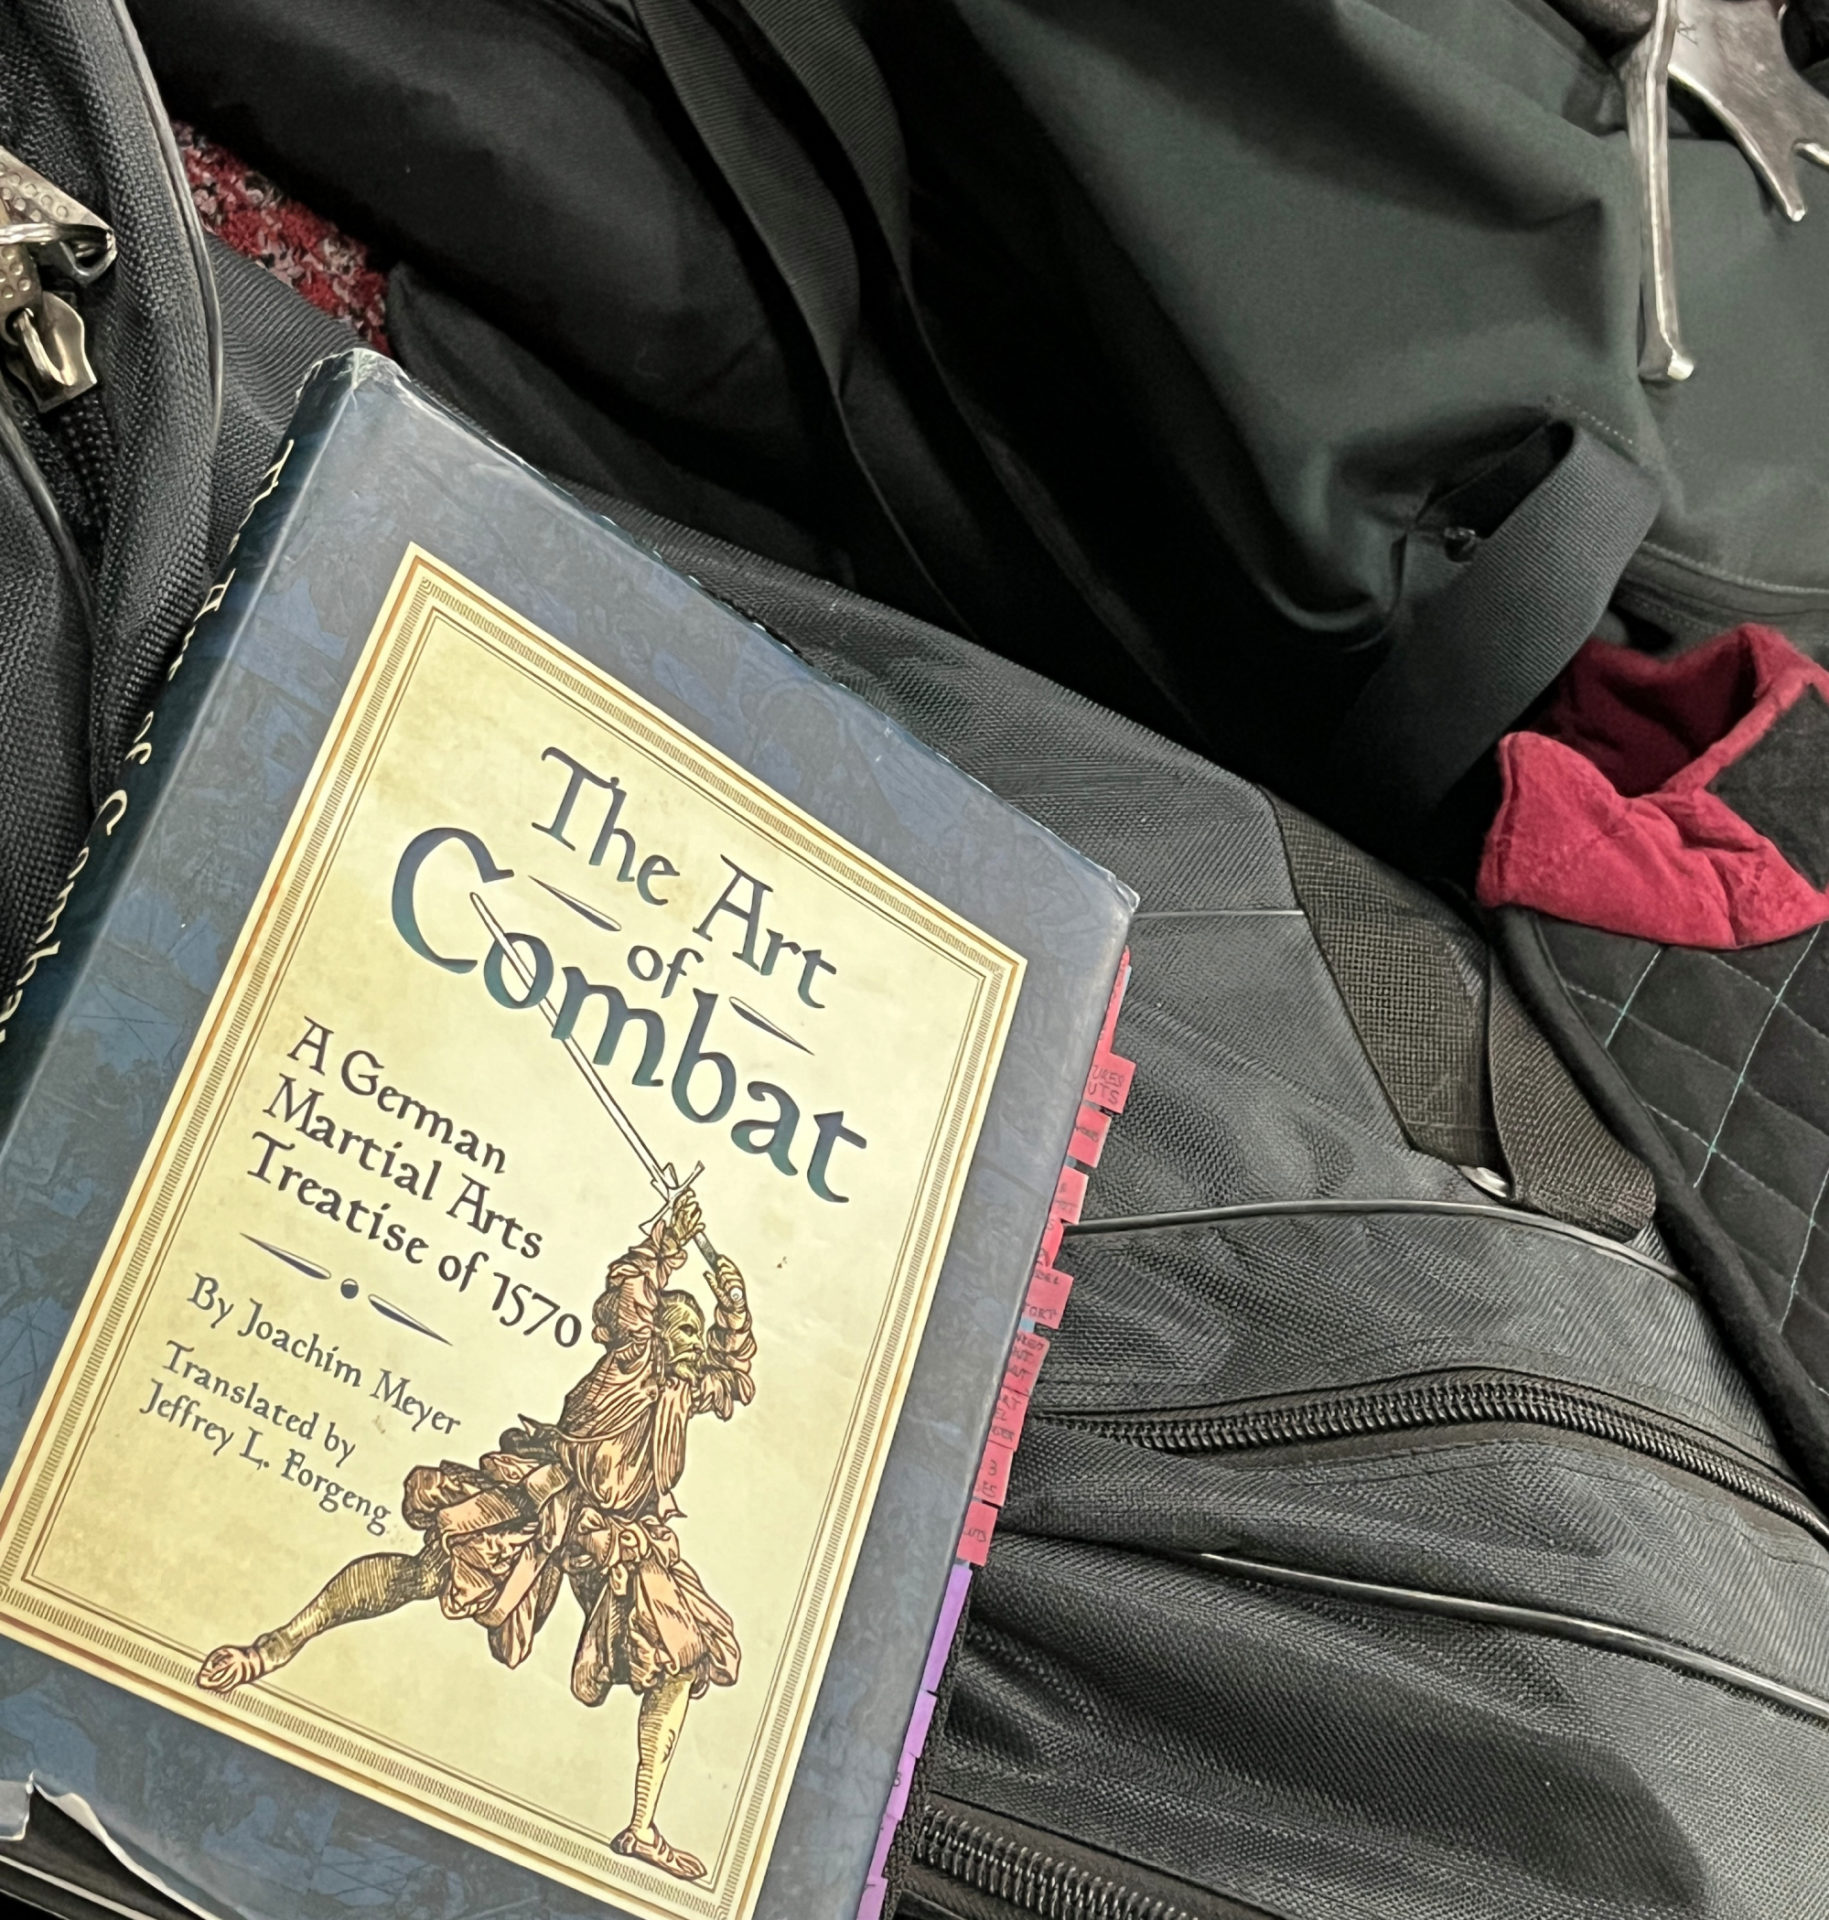 The Art of Combat by Joachim Meyer is sitting on a pile of athletic and protective gear. The book contains many tabs on the side, where the reader made notes.